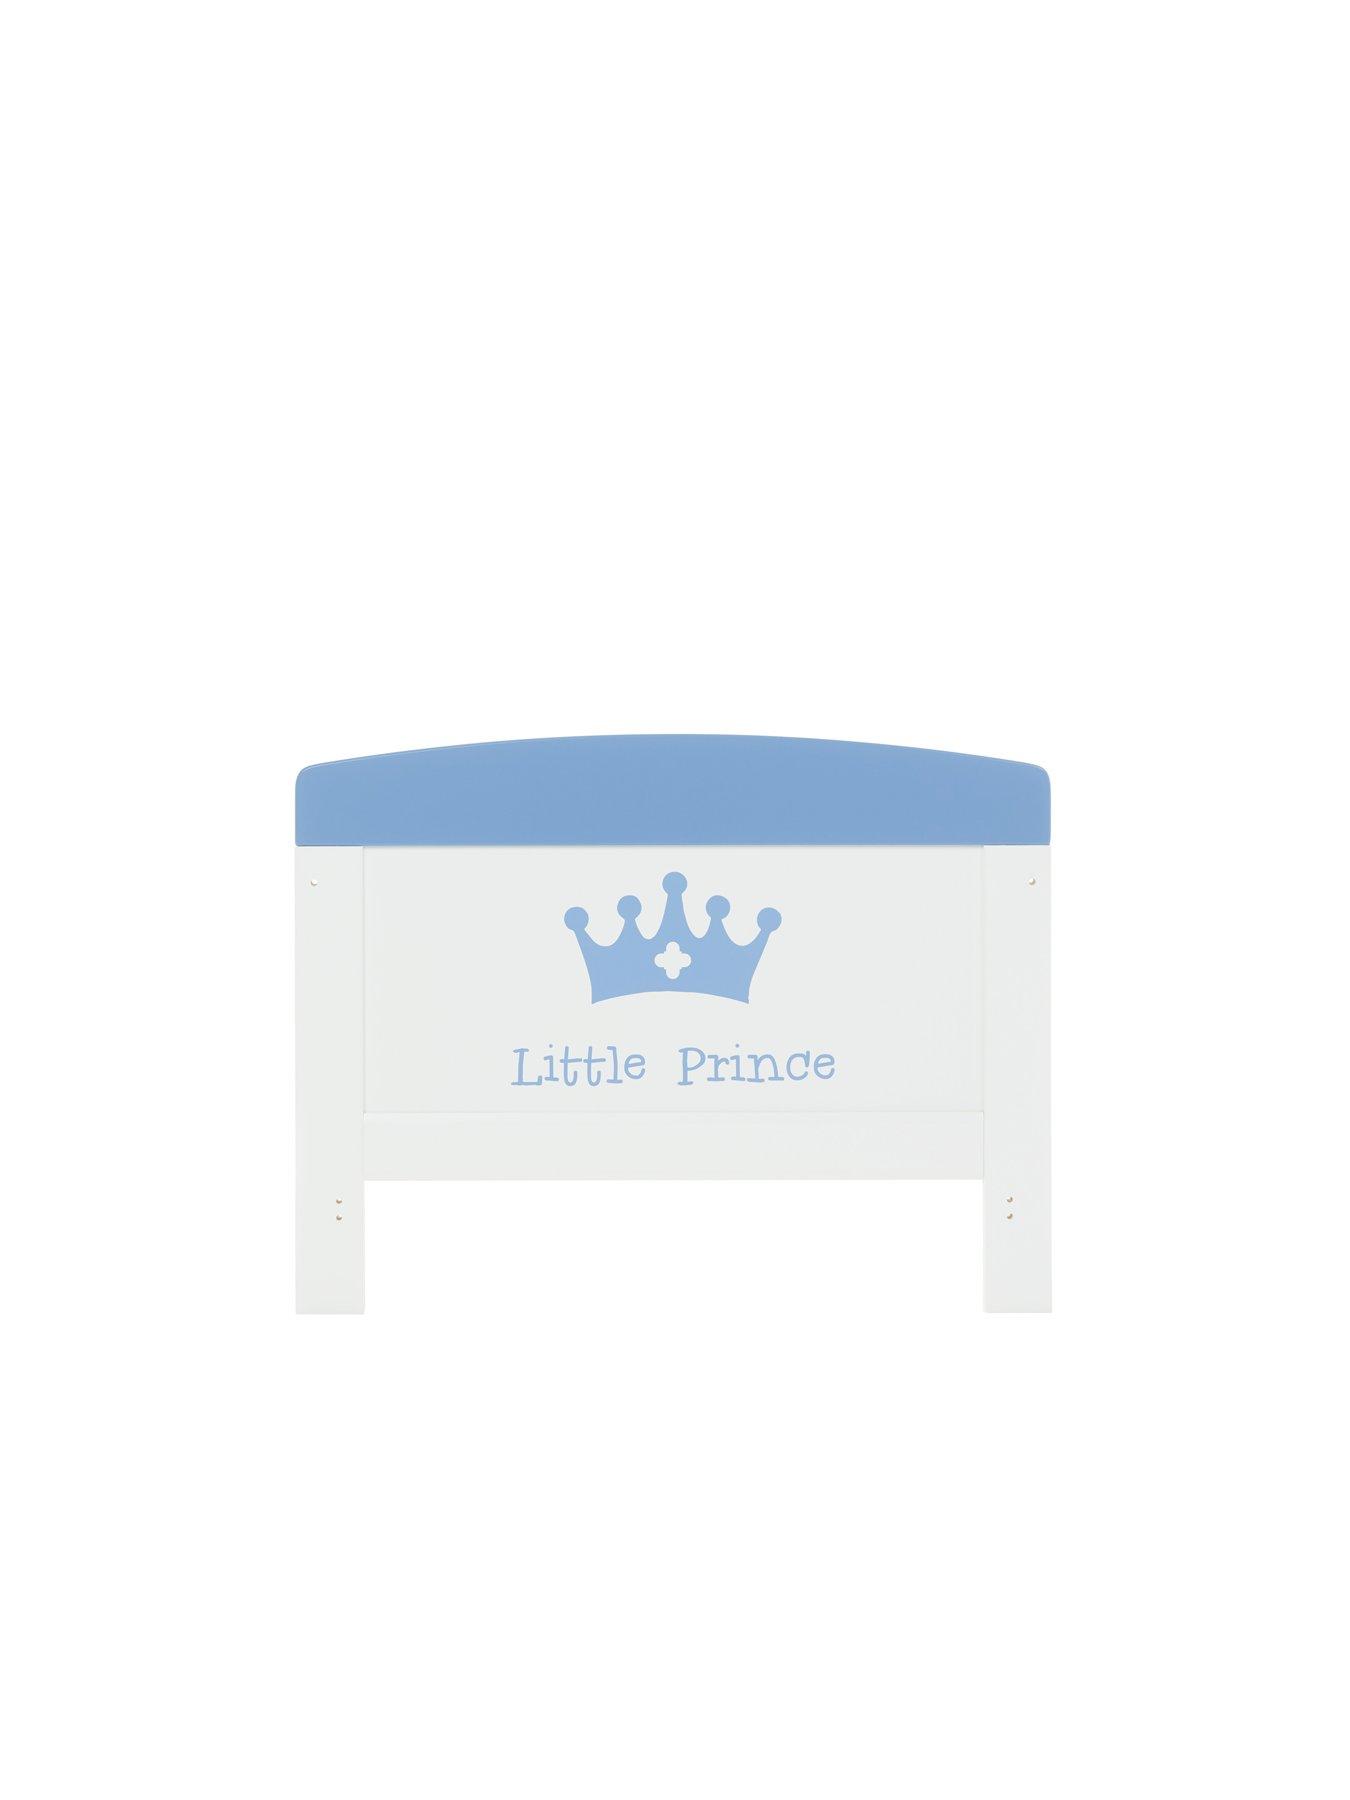 prince cot bed